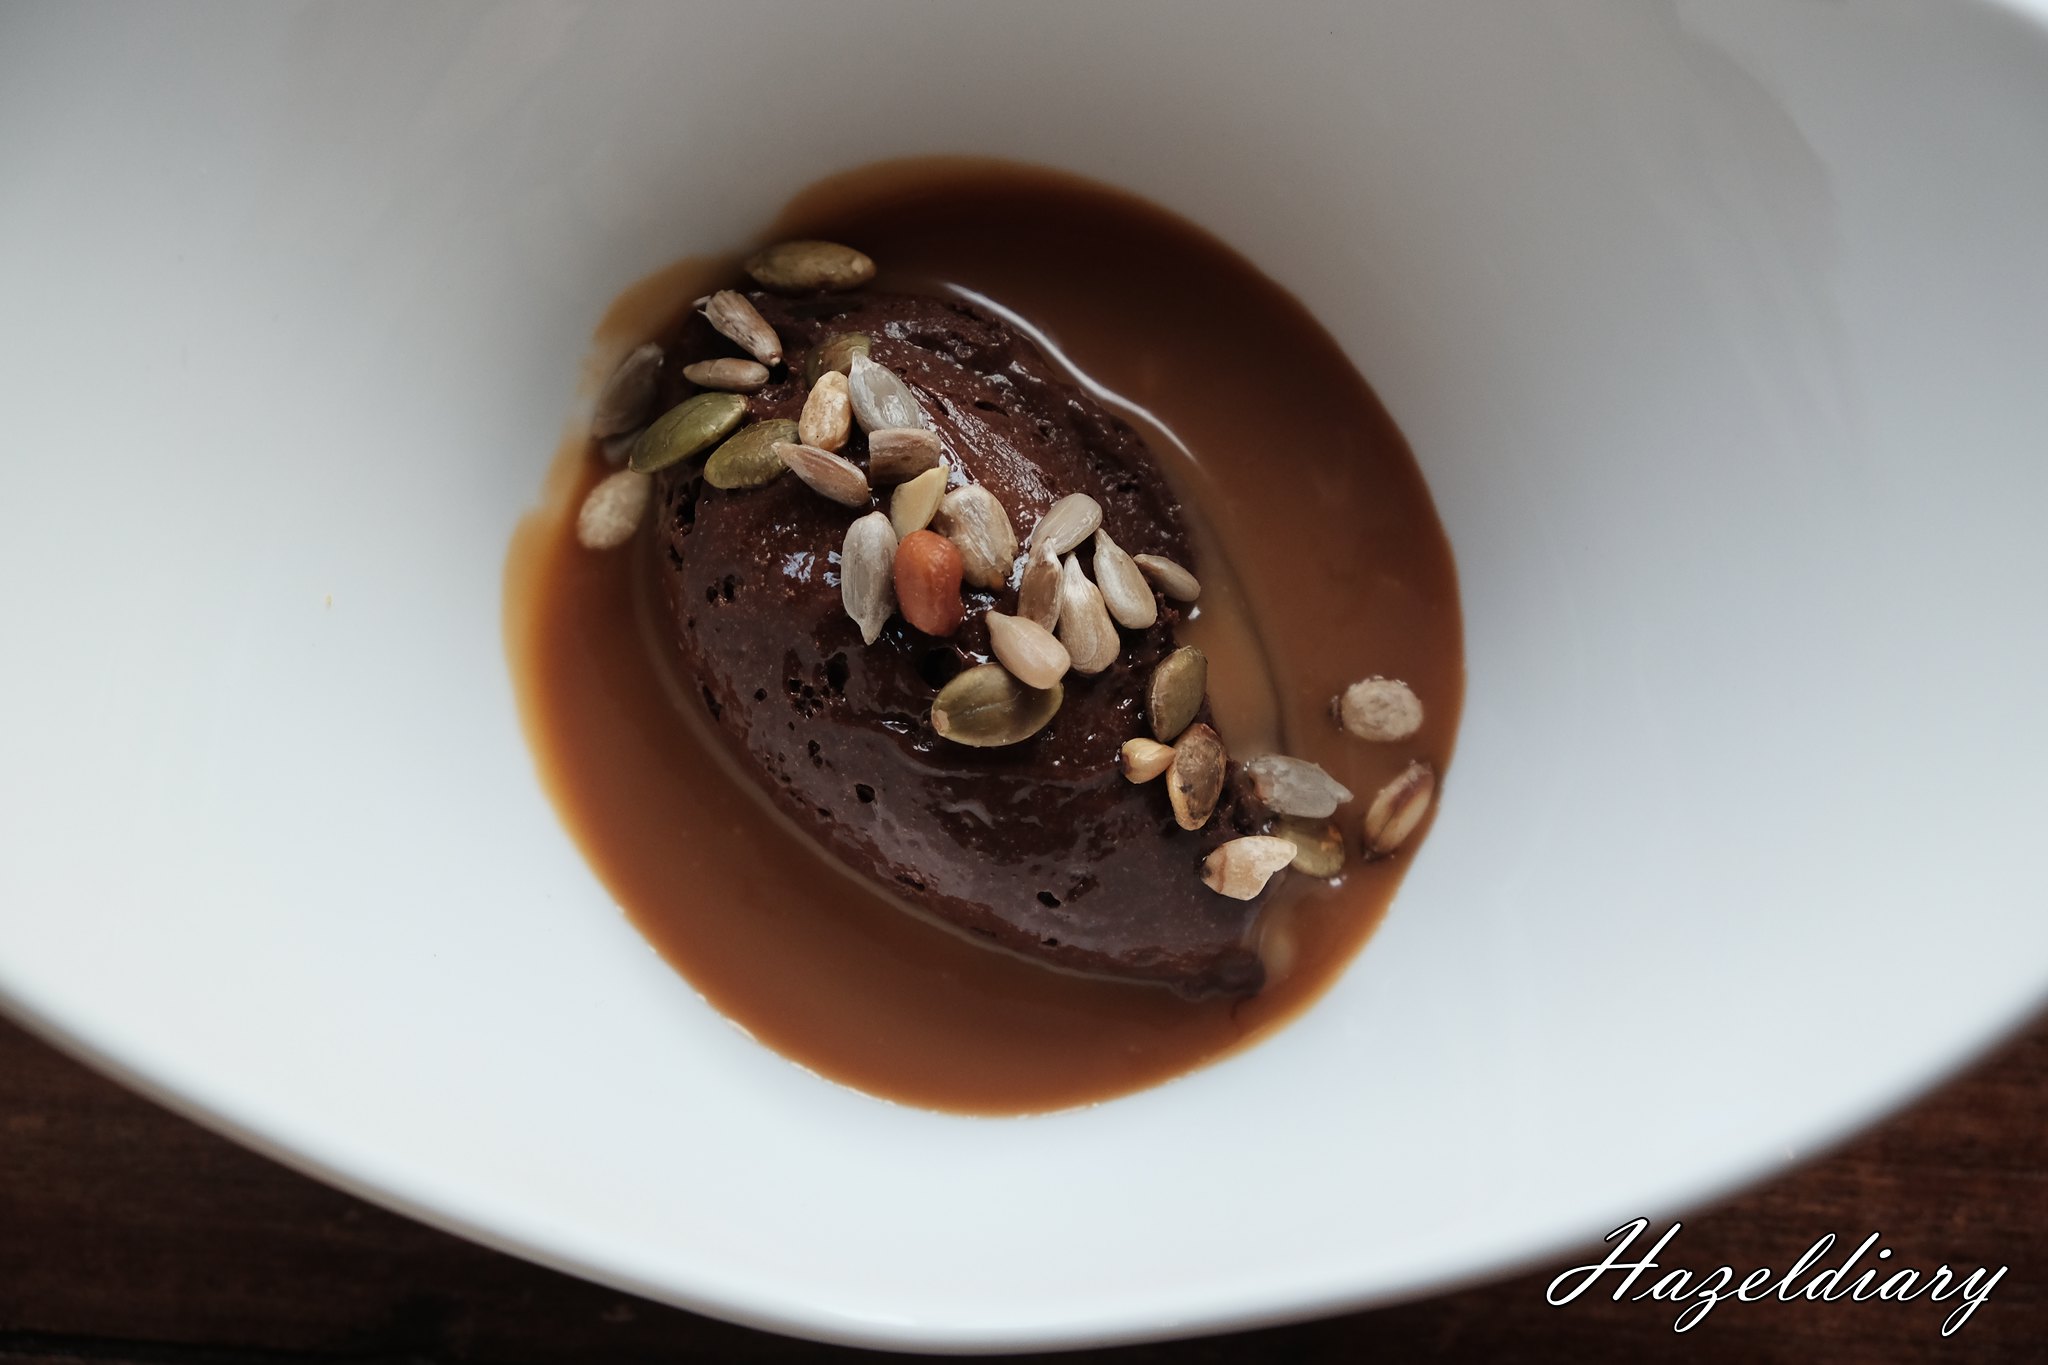 Audace-Dark Chocolate Mousse With Salted Caramel